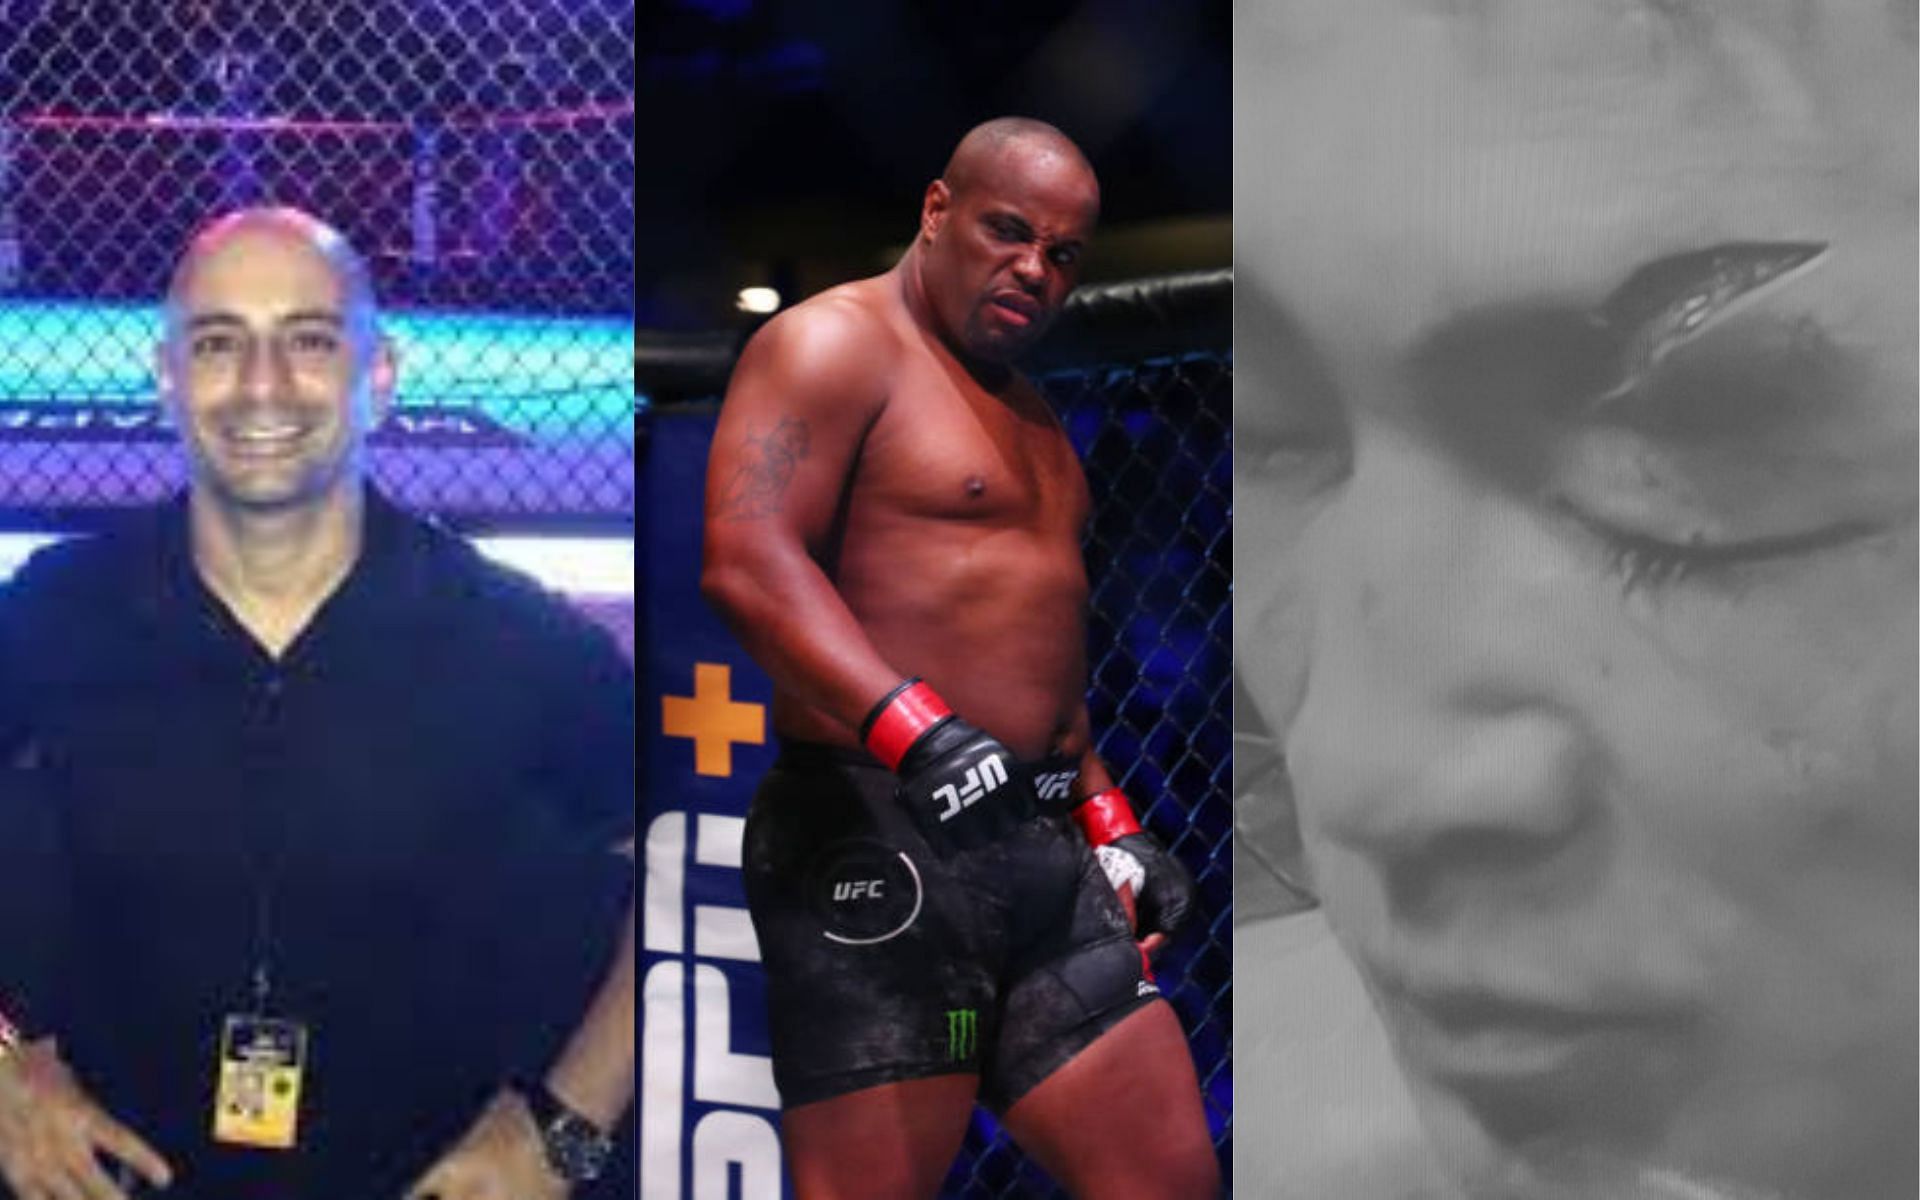 From left to right: Dr. Abbasi [image courtesy of @DrDavidAbbasi/Twitter]; Daniel Cormier; Song Yadong